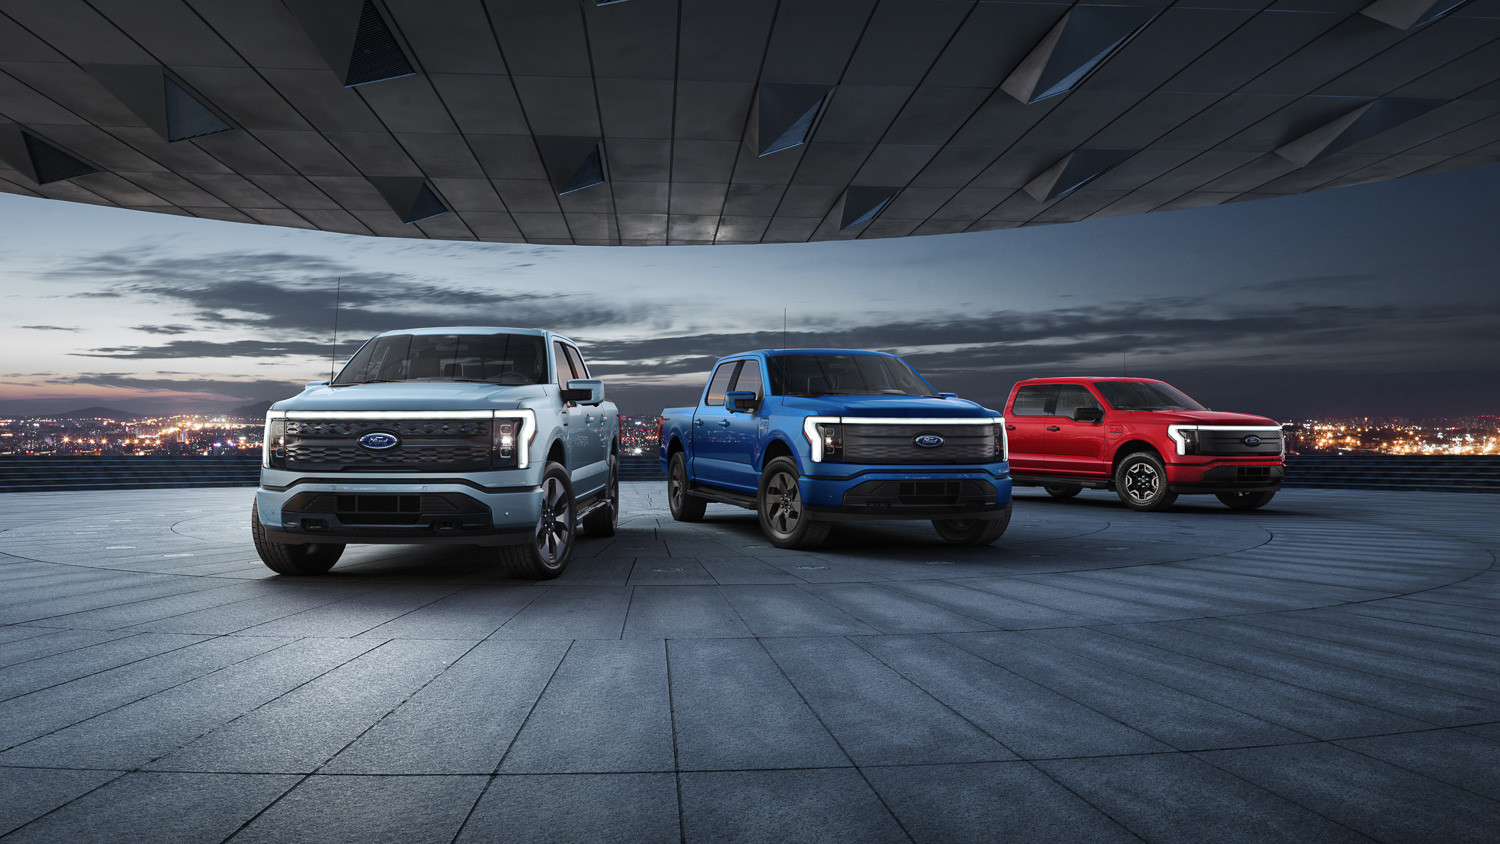 Ford announces F-150 Lightning; the electric truck can reach 60 mph in just 4 seconds